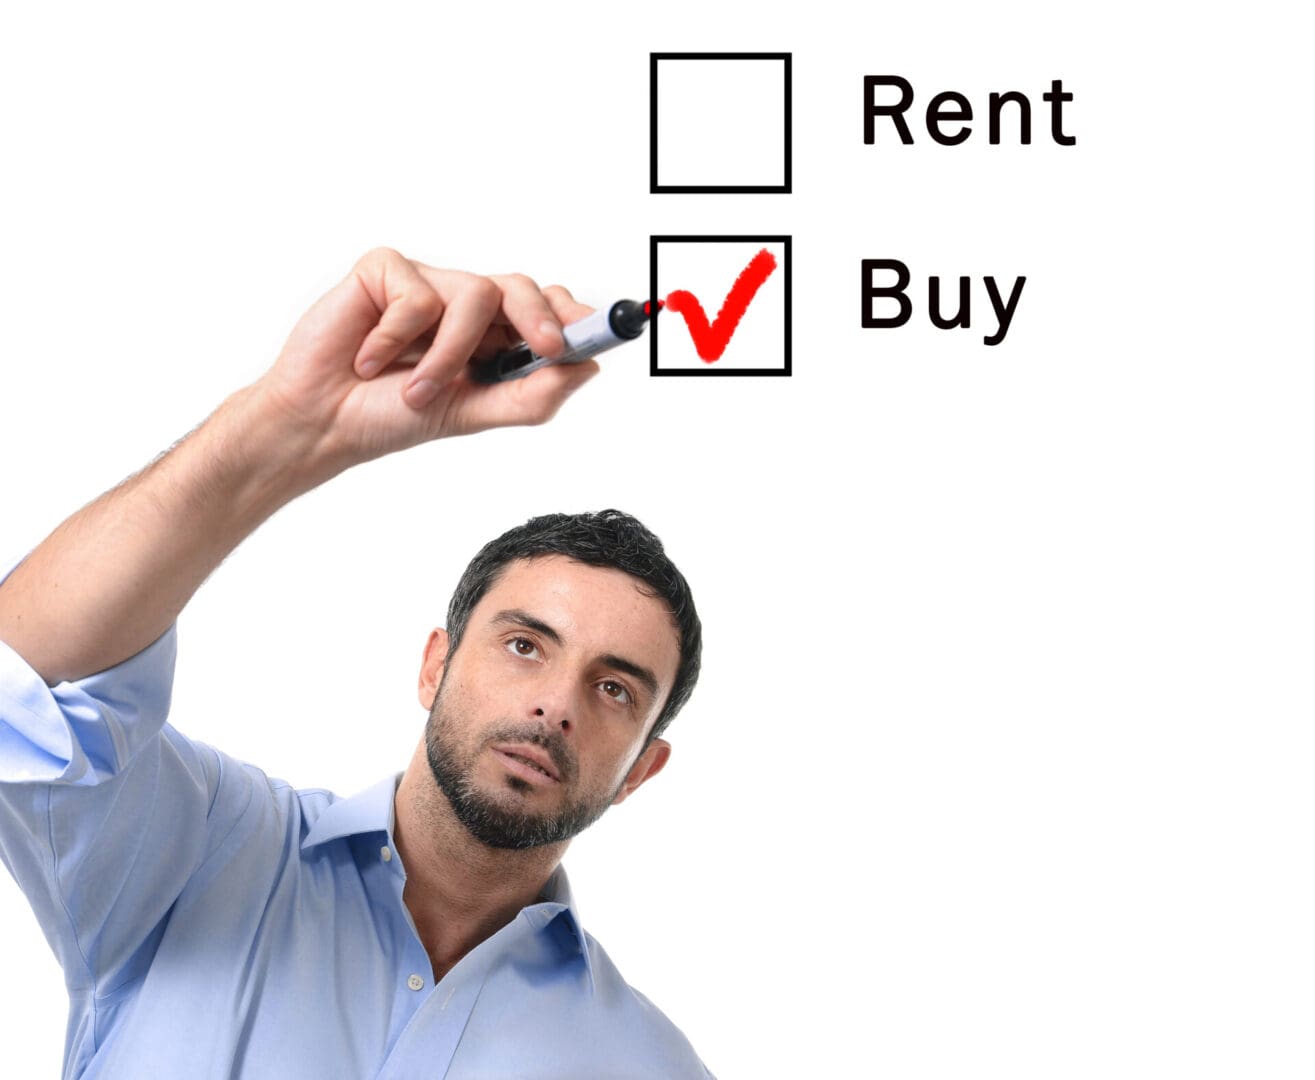 Man ticking the 'buy' option on a list comparing rent and buying a home choices.